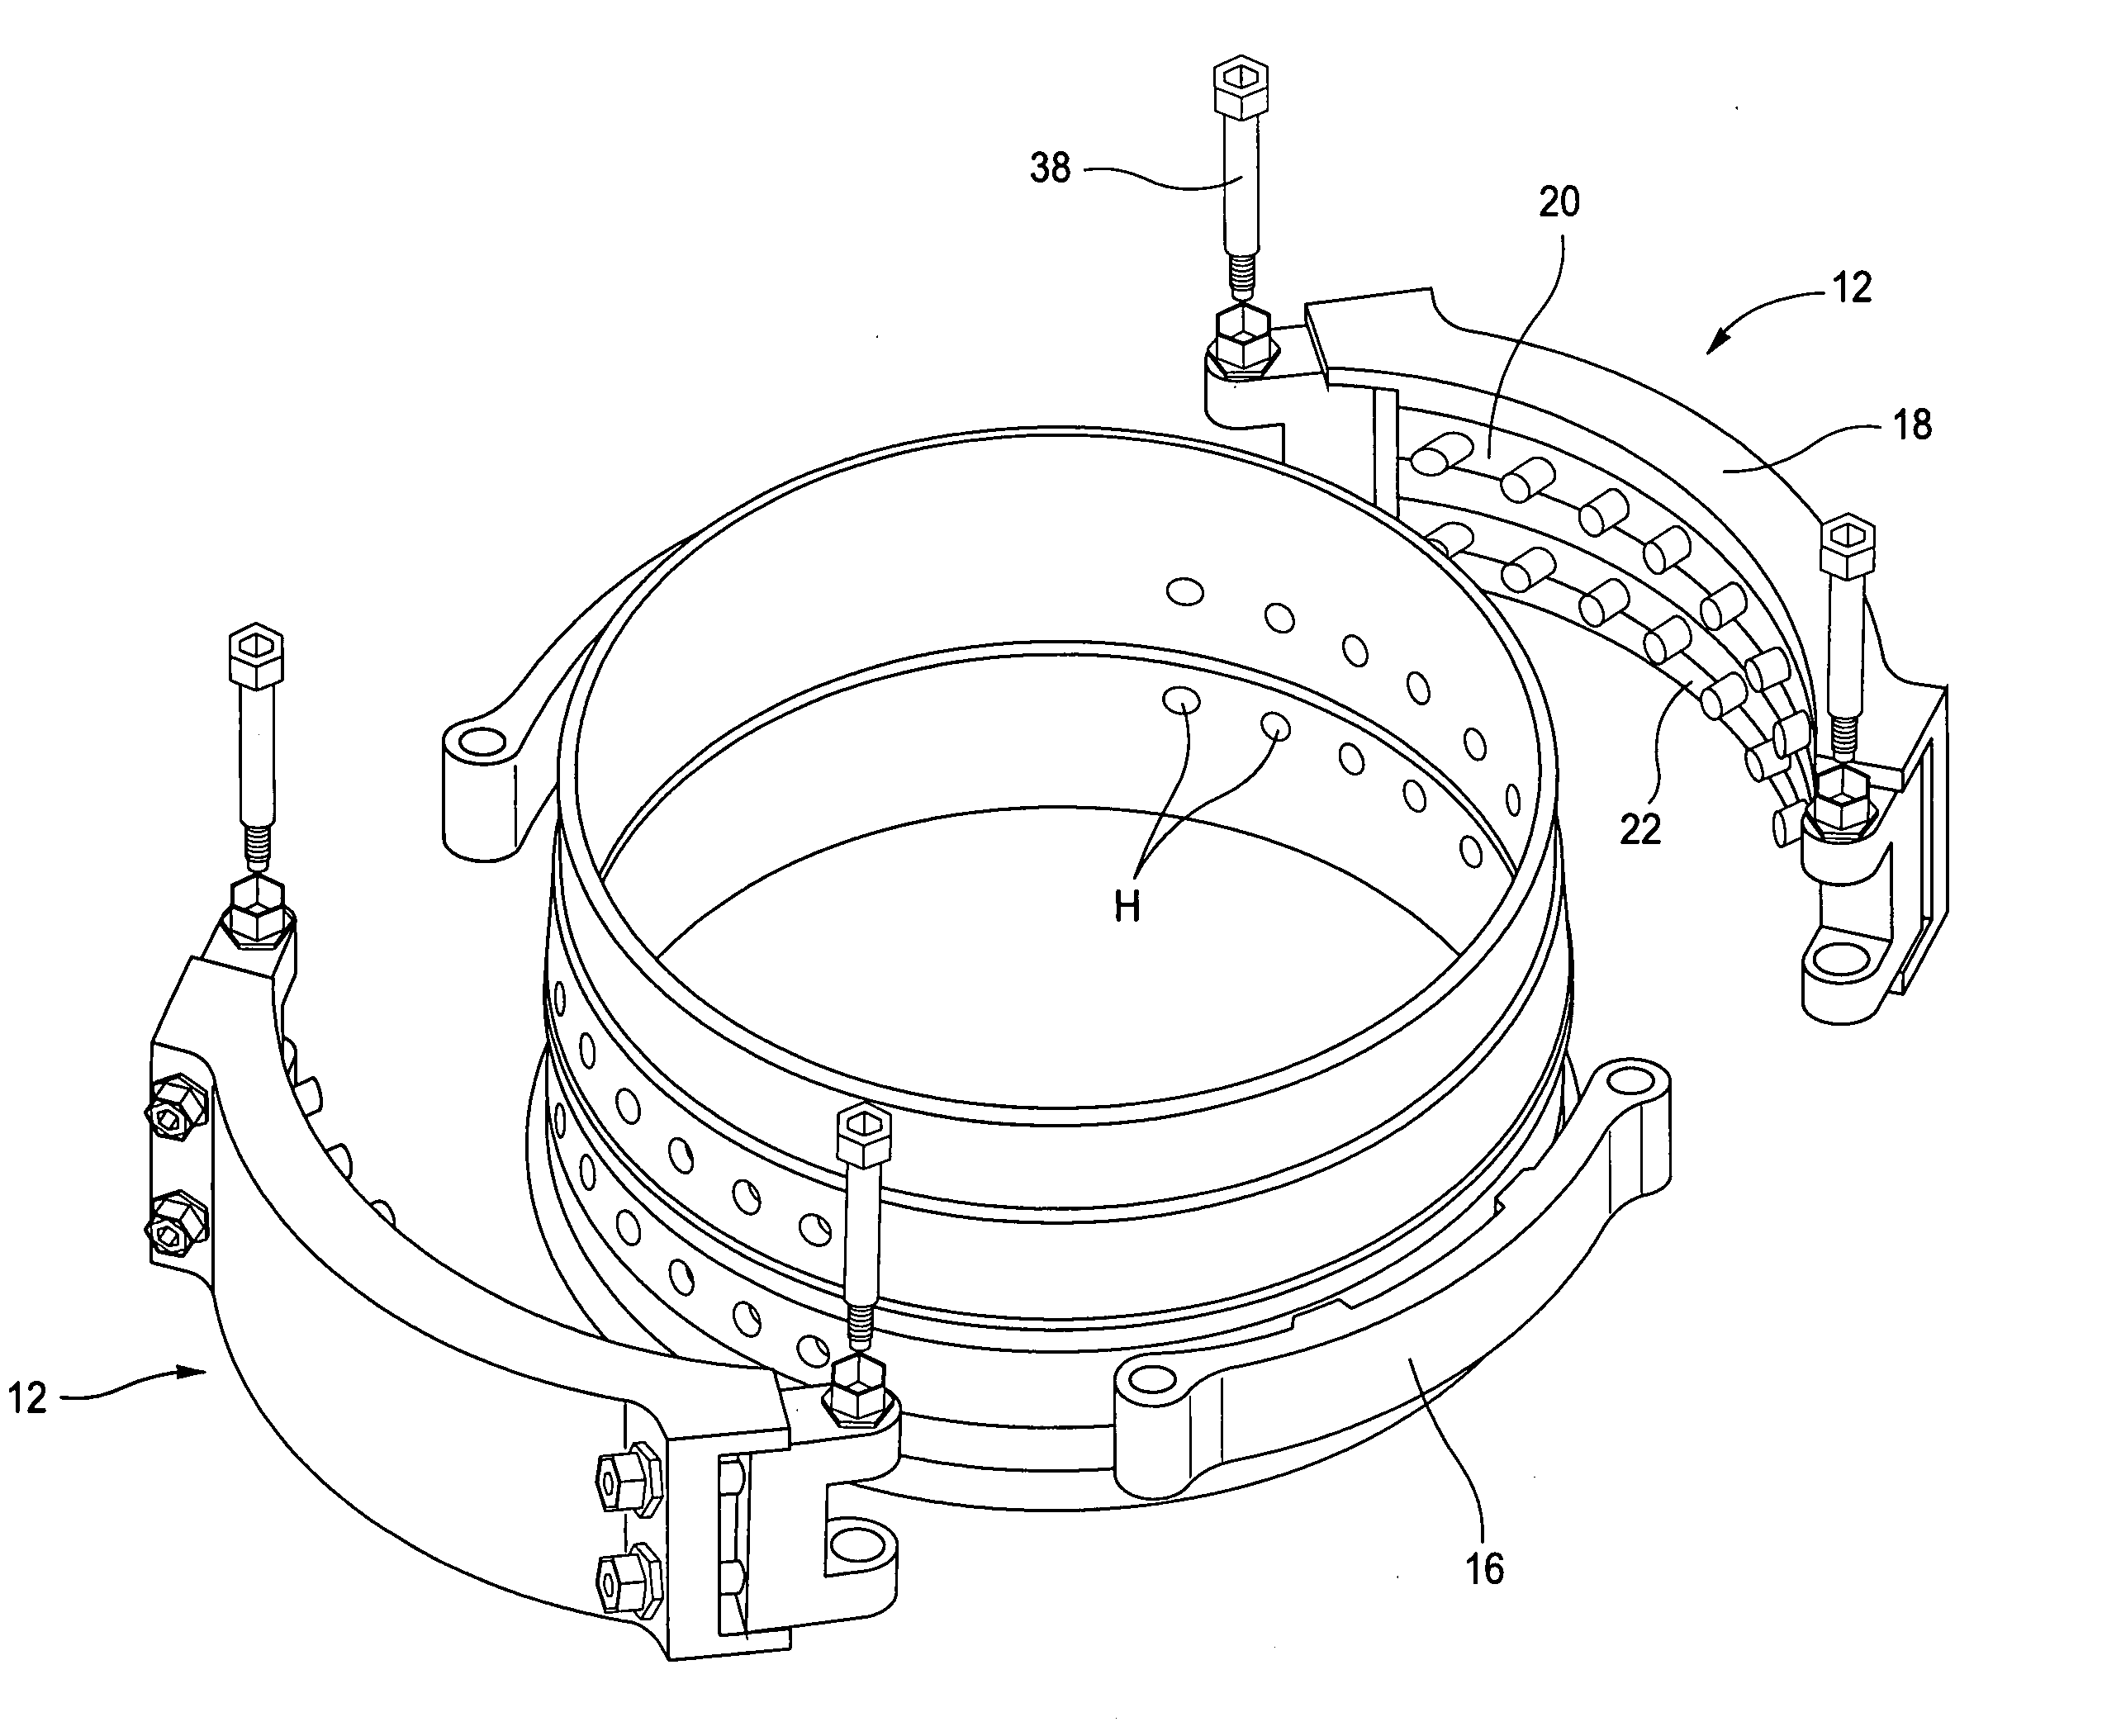 Method and apparatus for repairing a jet pump diffuser adapter to tailpipe weld